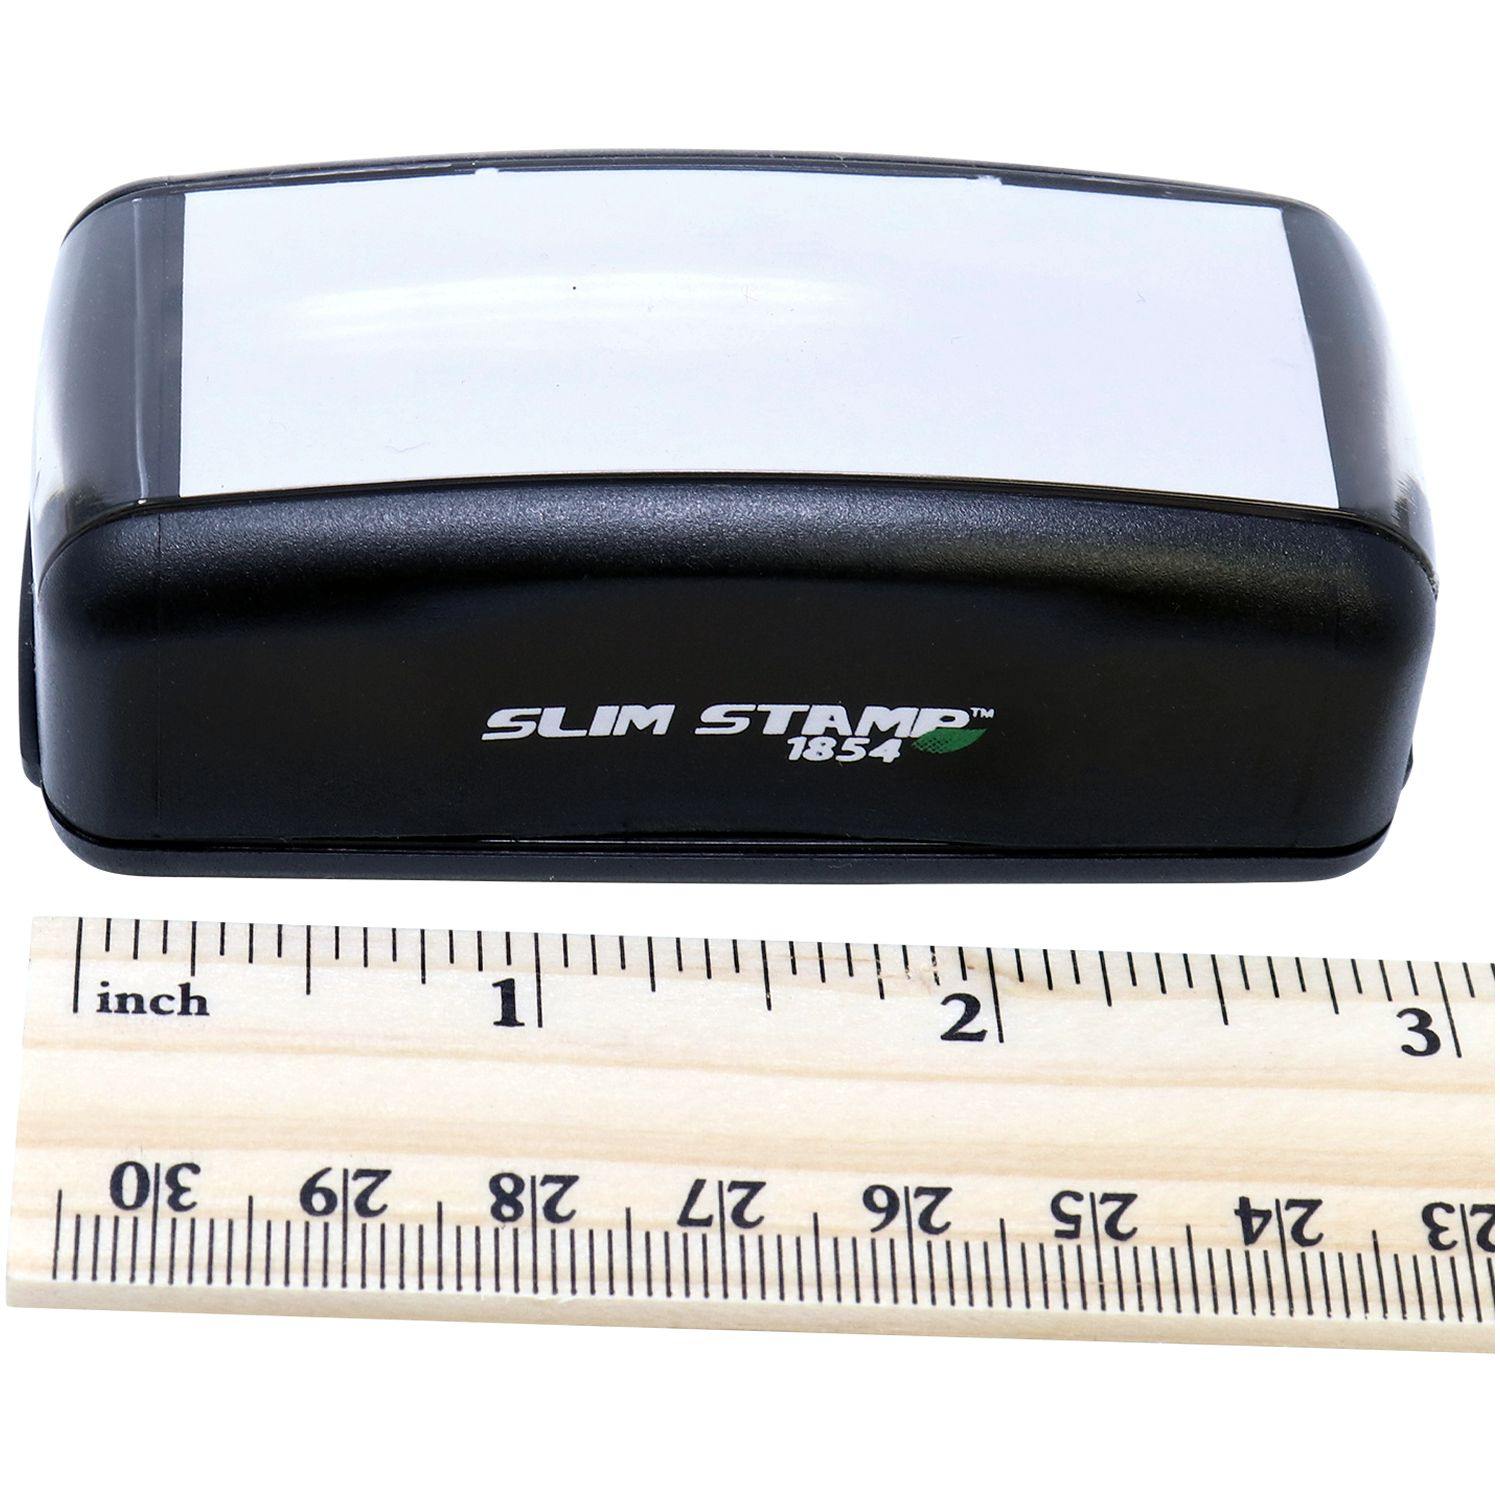 Measurement Large Pre Inked Faxed Stamp with Ruler